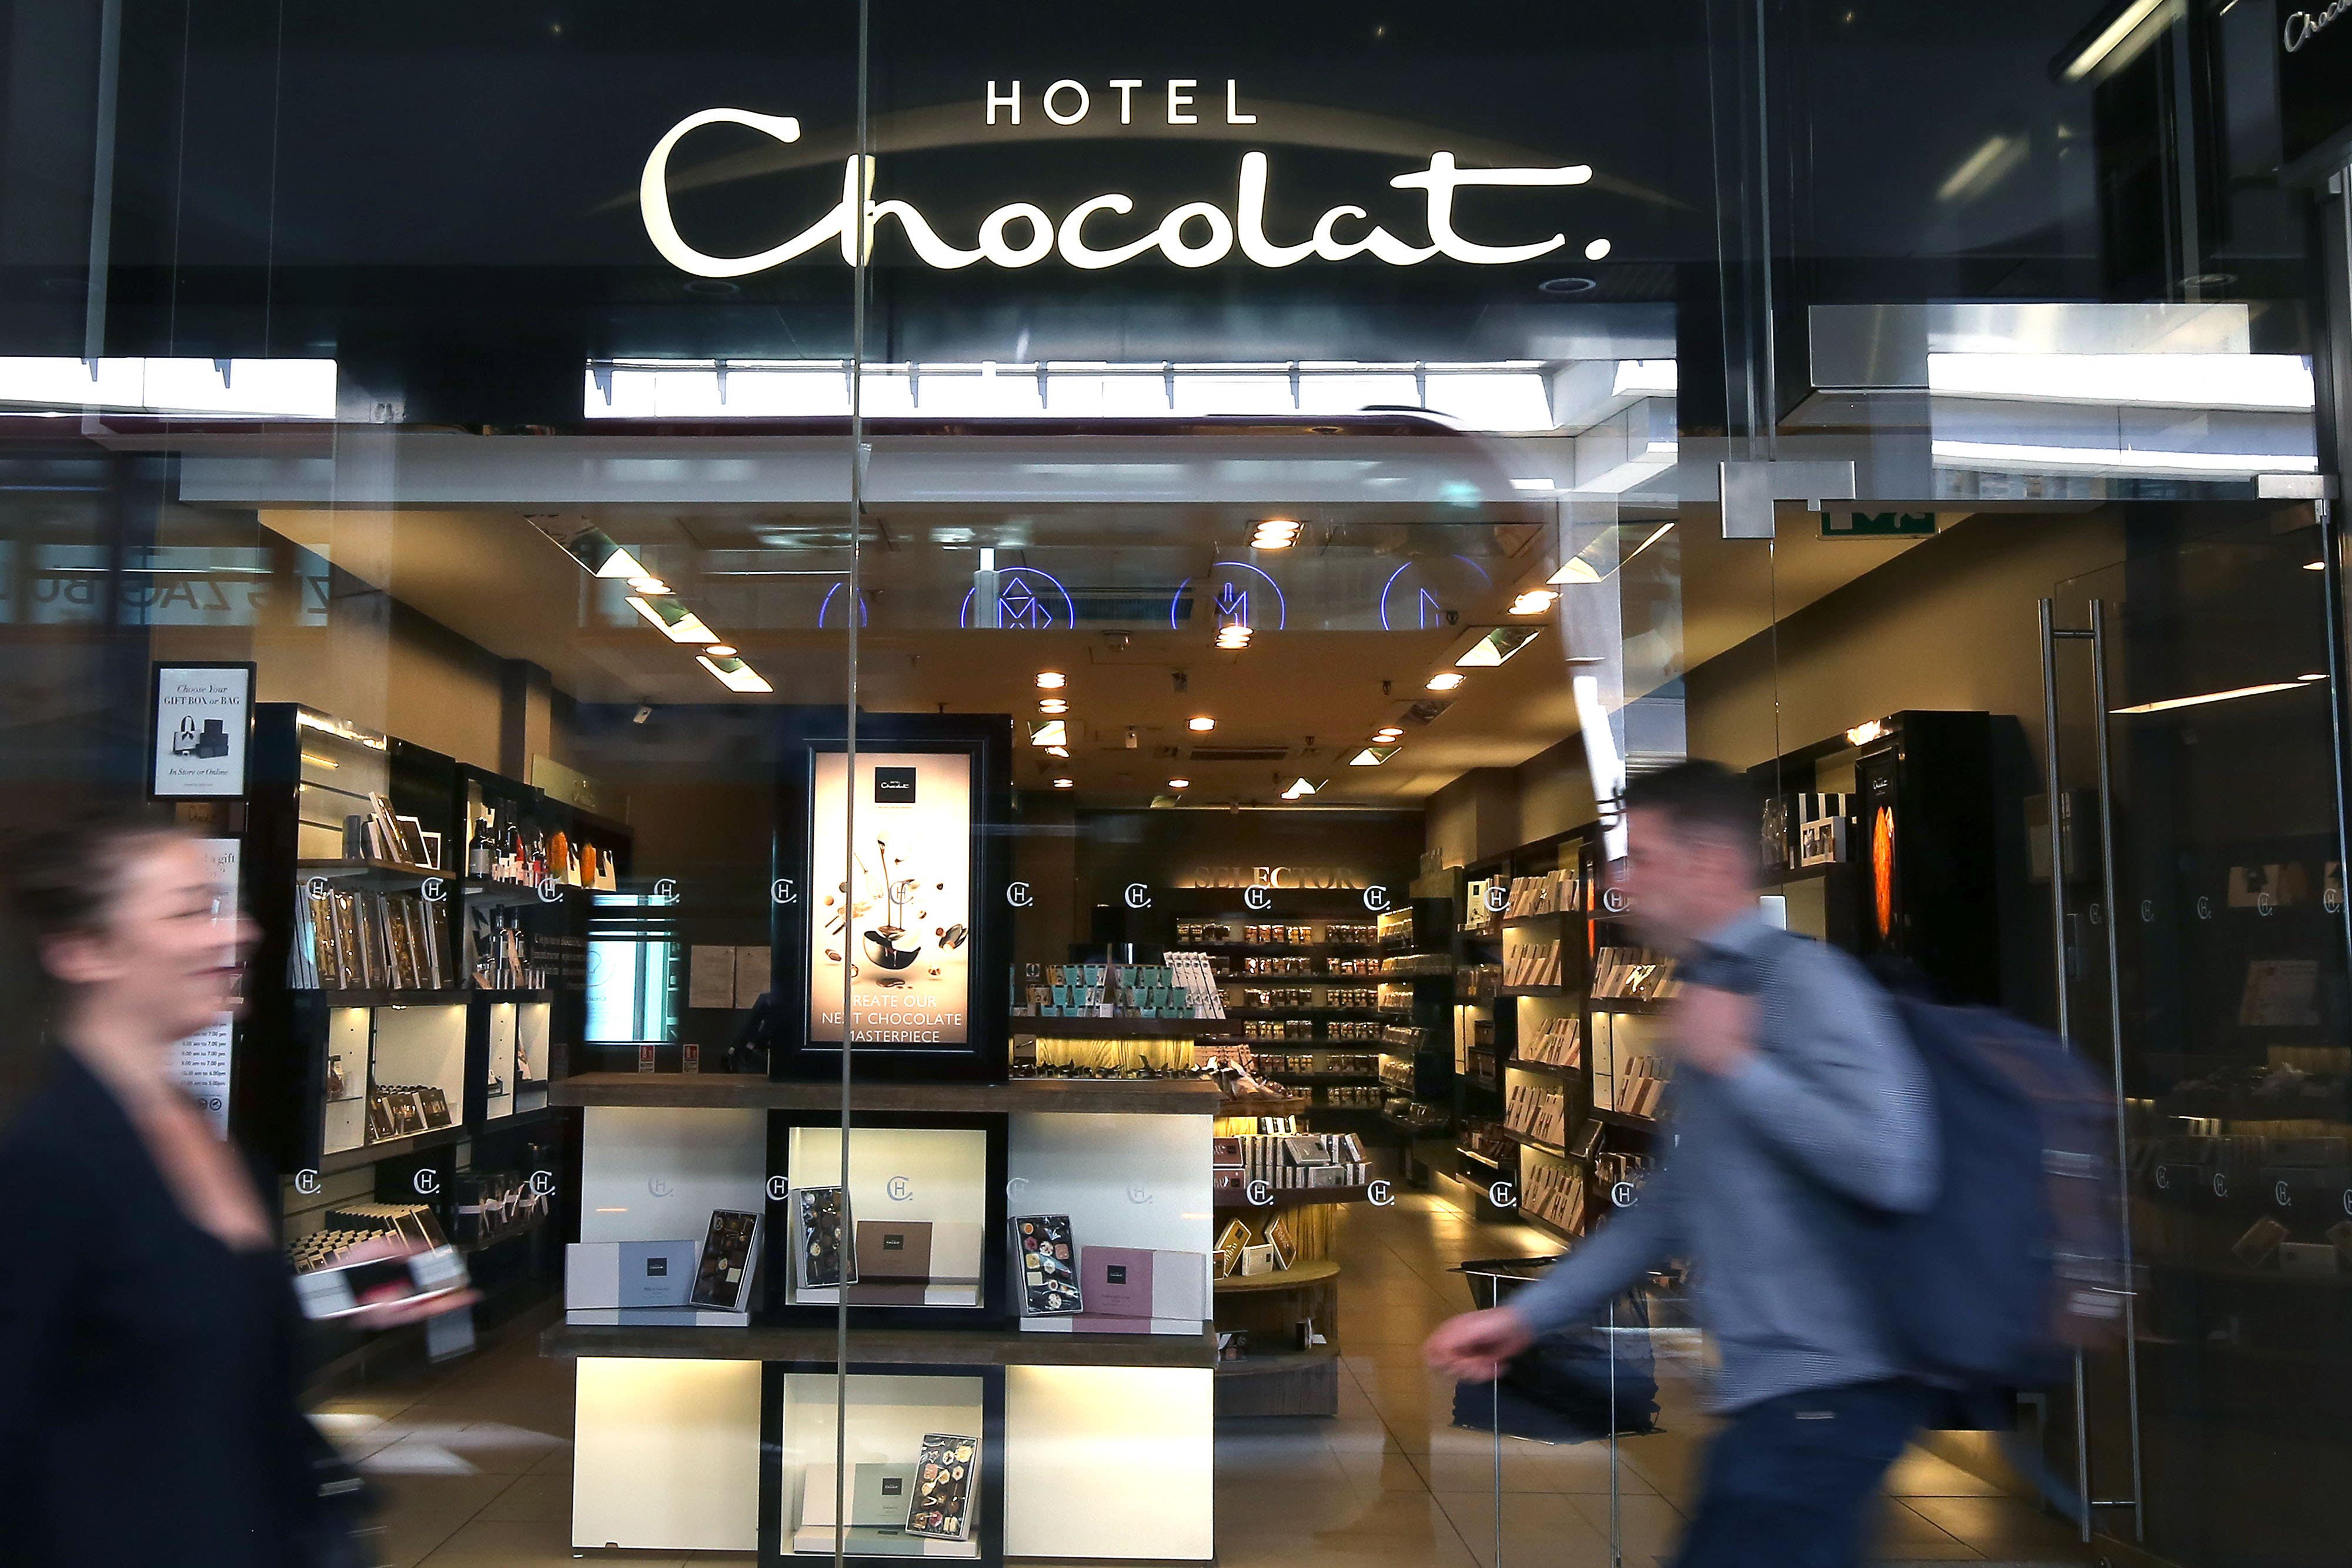 Food giant Mars Incorporated is buying retailer Hotel Chocolat in a deal worth £534 million (Philip Toscano/PA)